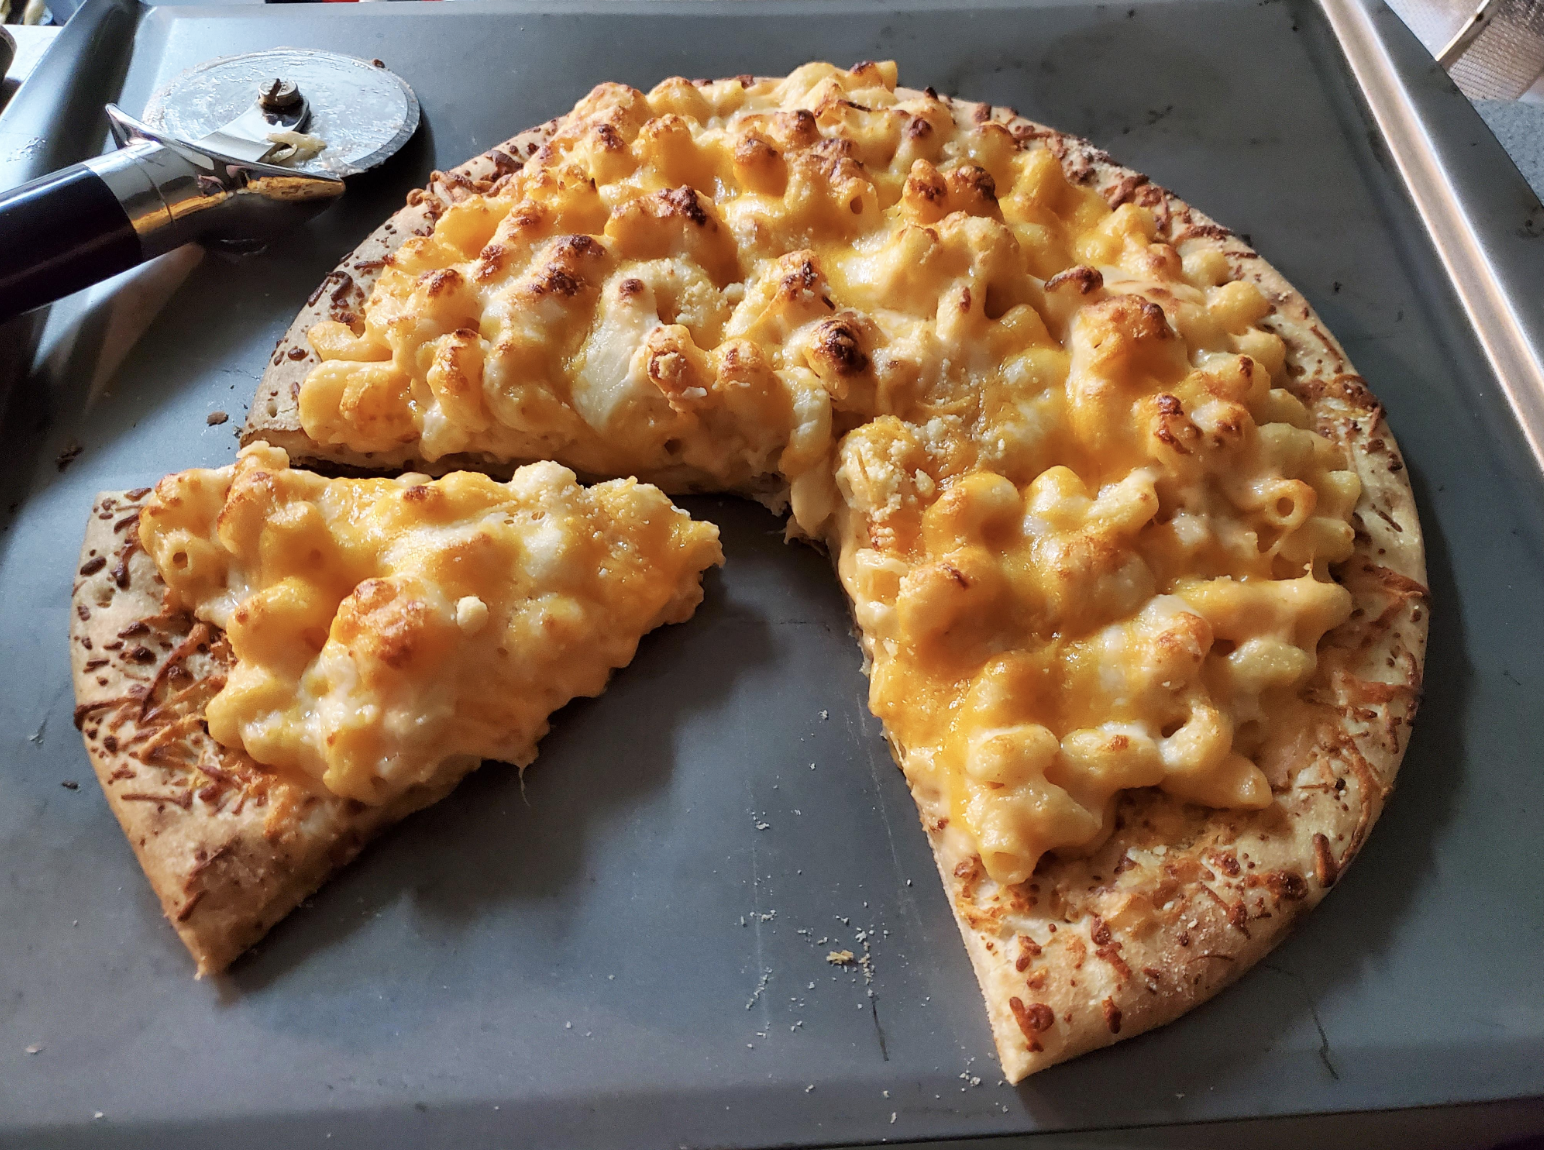 Pizza with macaroni and cheese topping, one slice removed, on a baking tray next to a pizza cutter